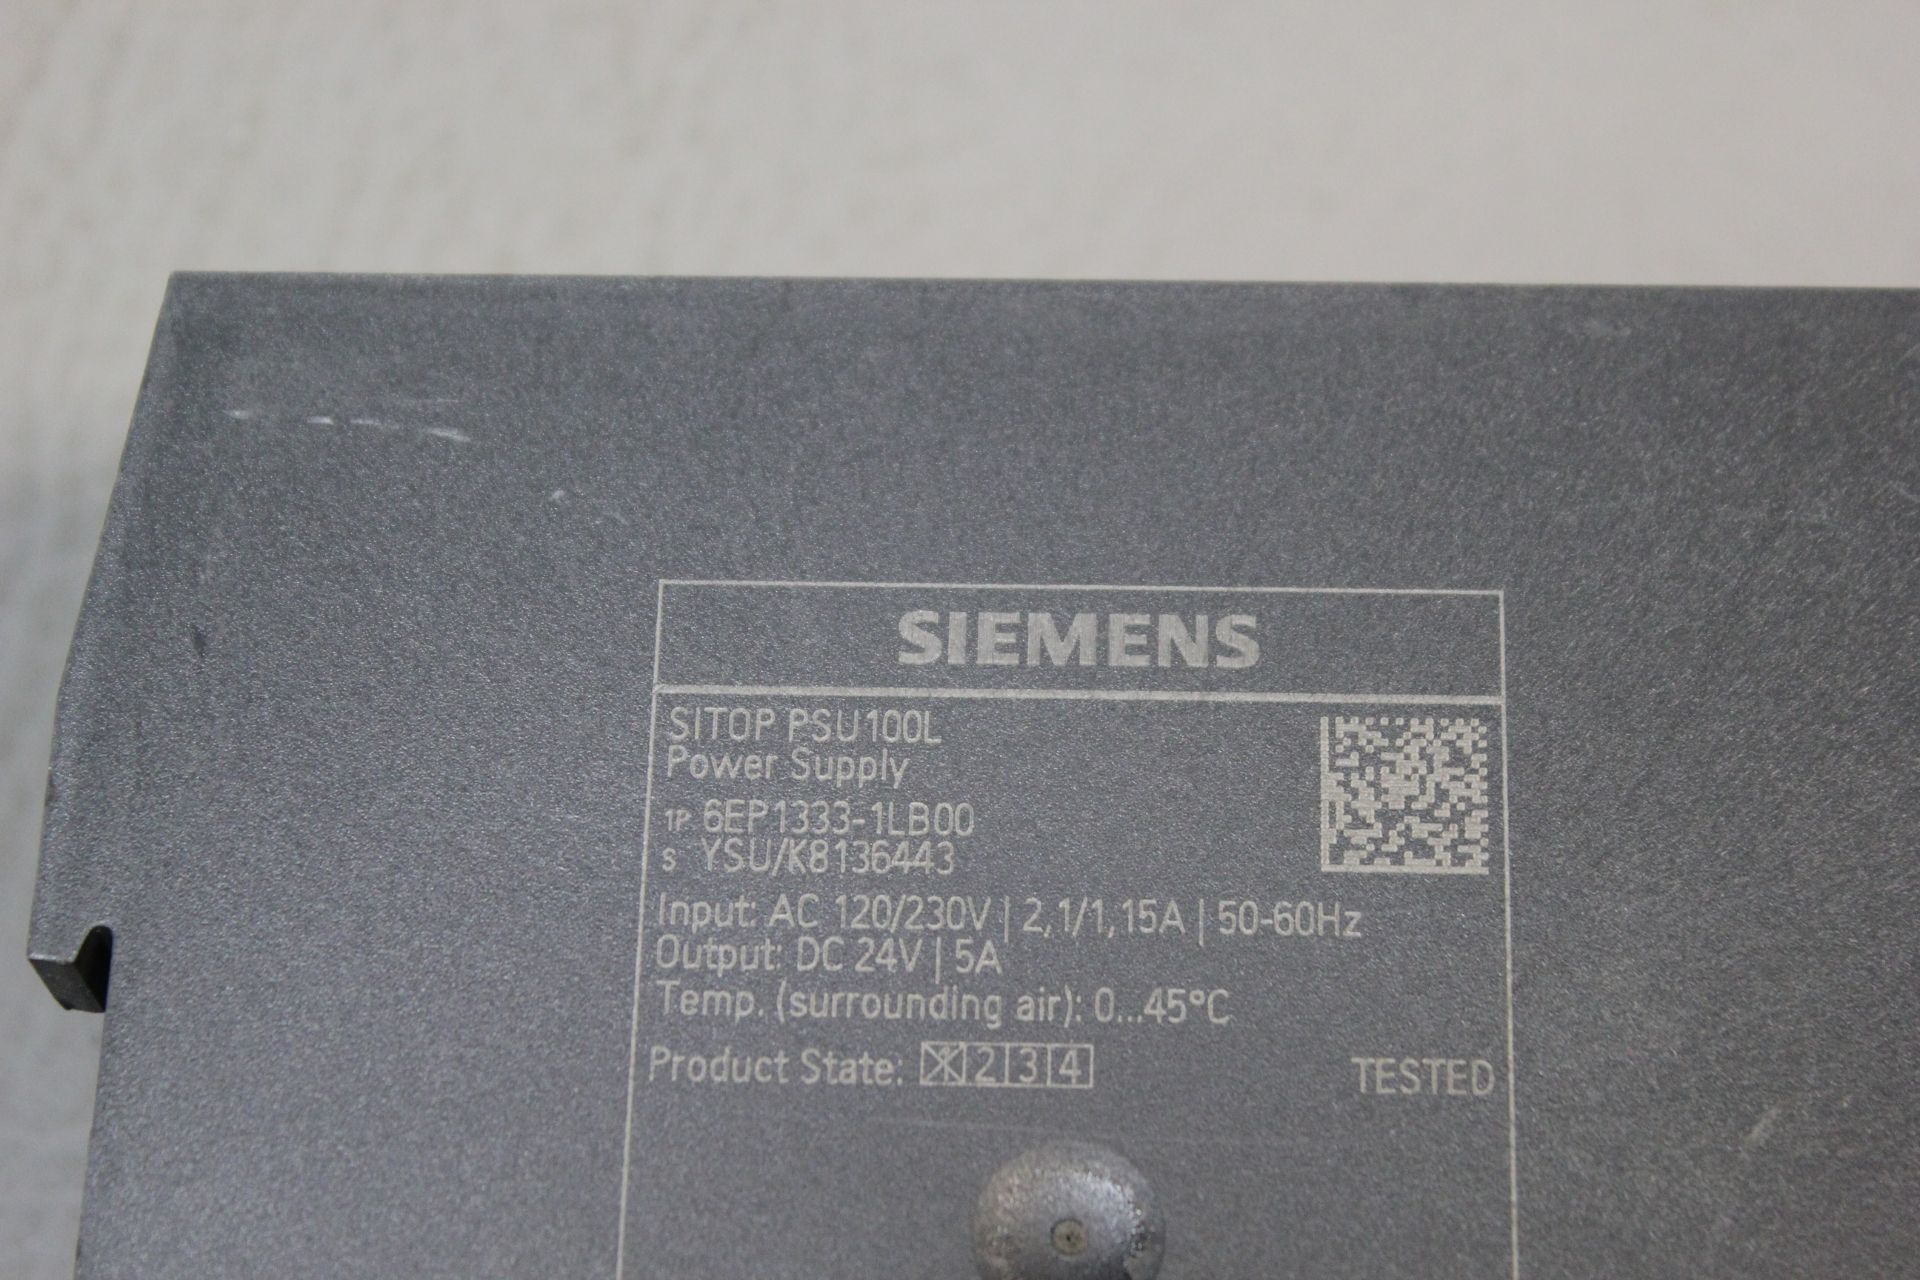 SIEMENS SITOP PSU100L AUTOMATION POWER SUPPLY - Image 2 of 2